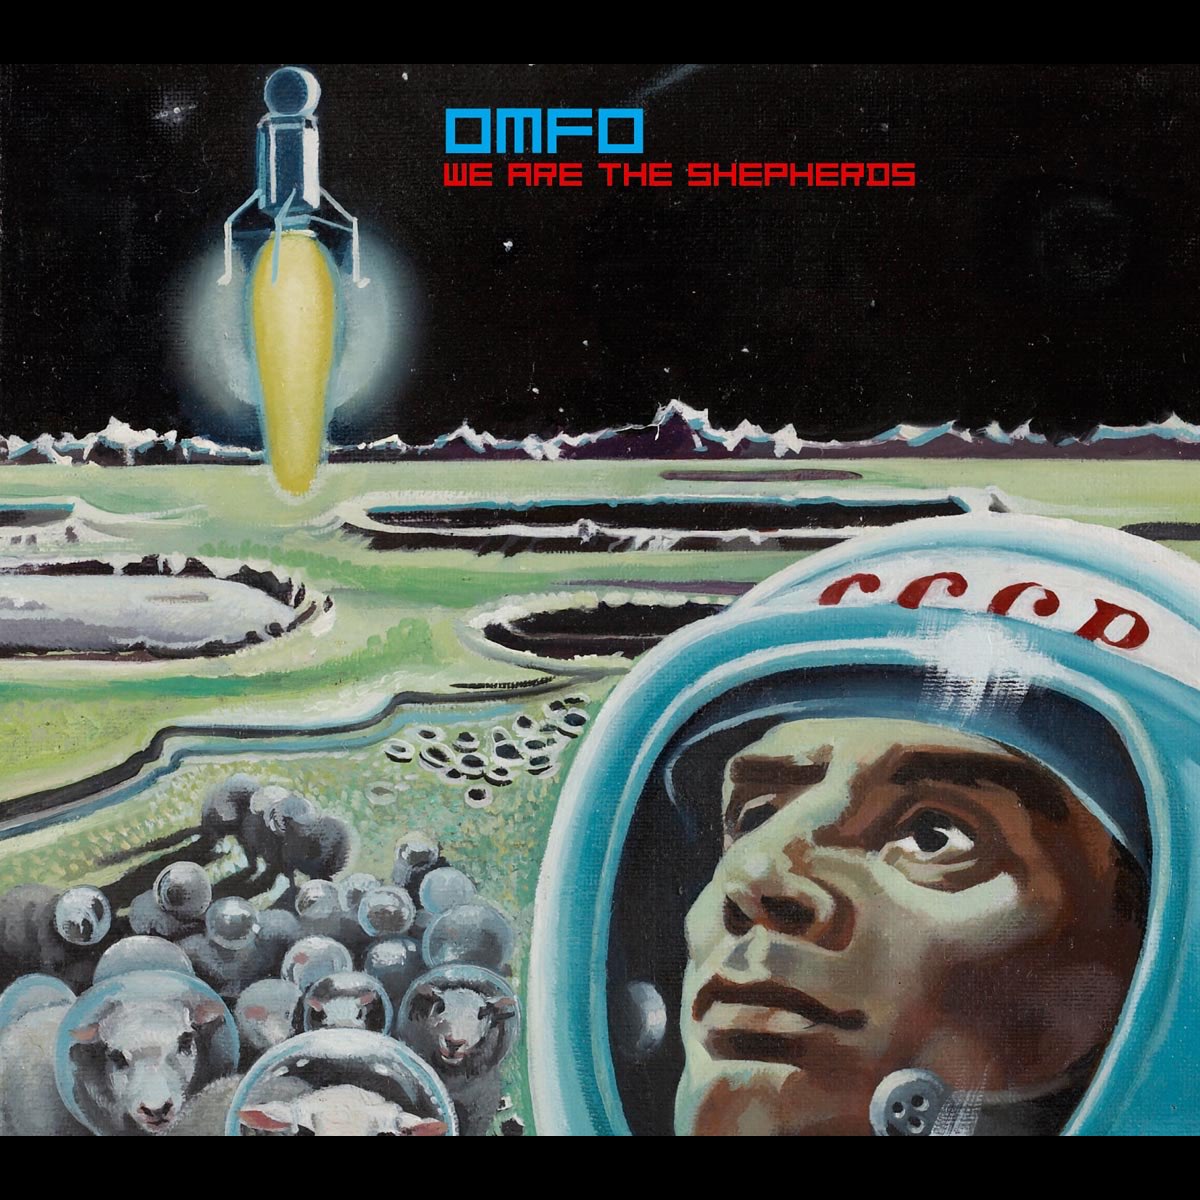 We Are the Shepherds - Album by OMFO - Apple Music